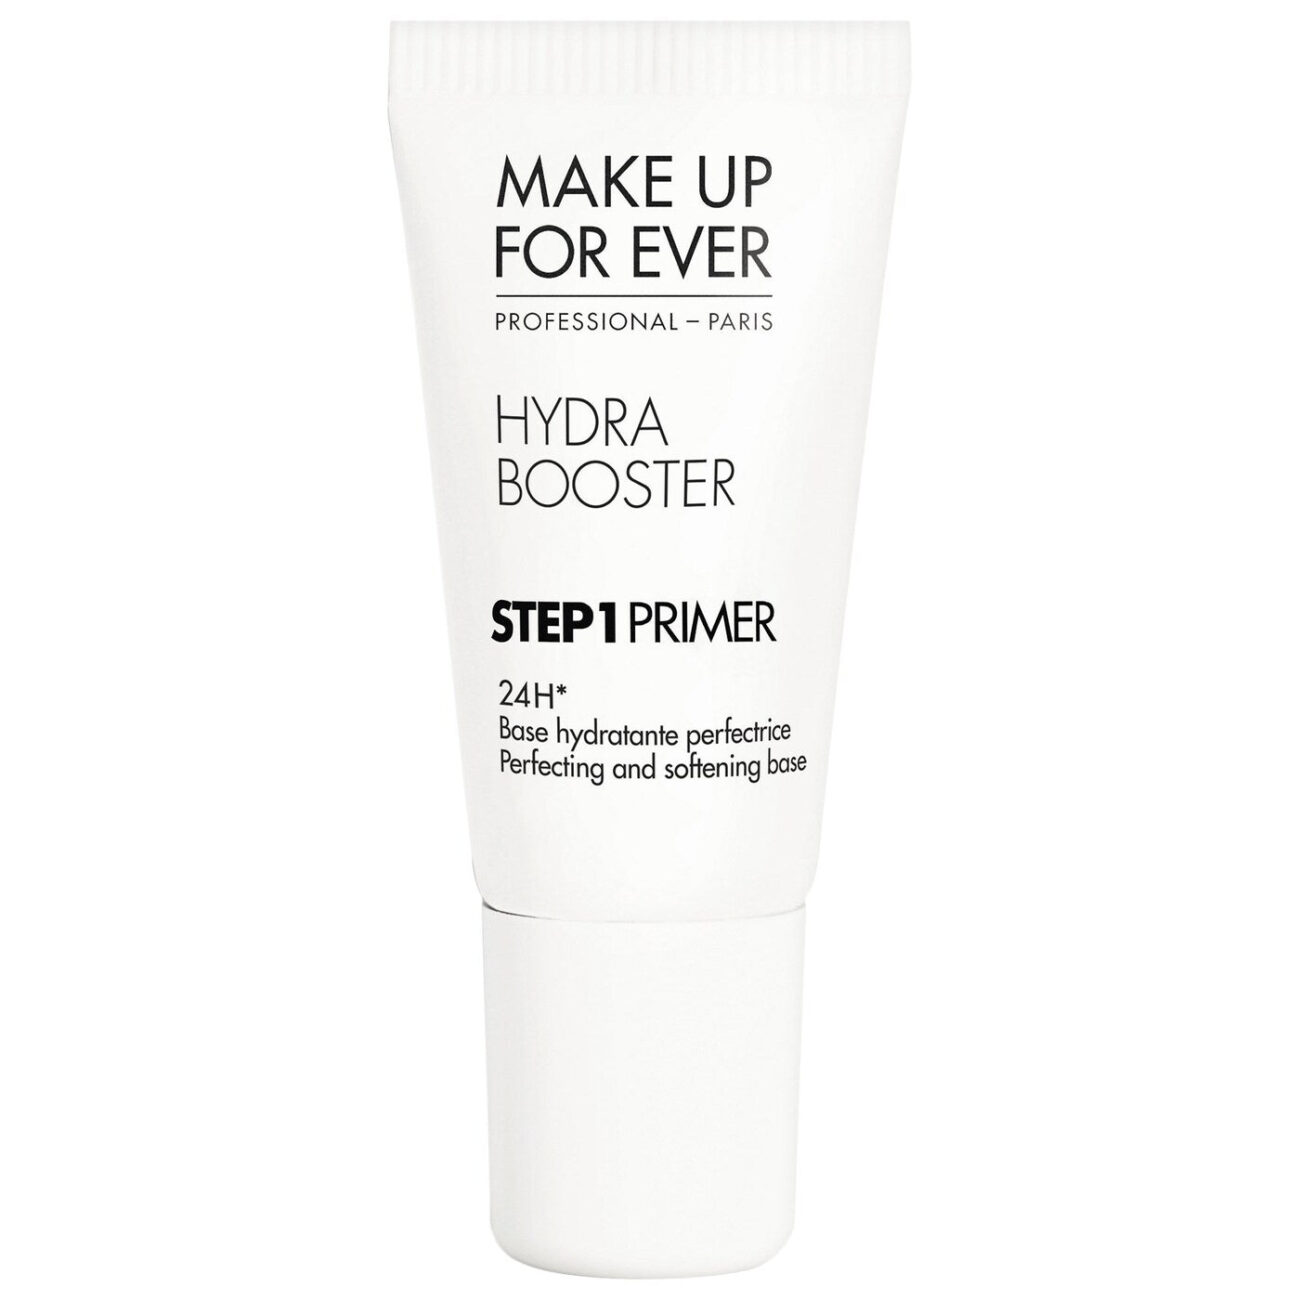 Step 1 Primer Hydra Booster trial size-Make Up For Ever